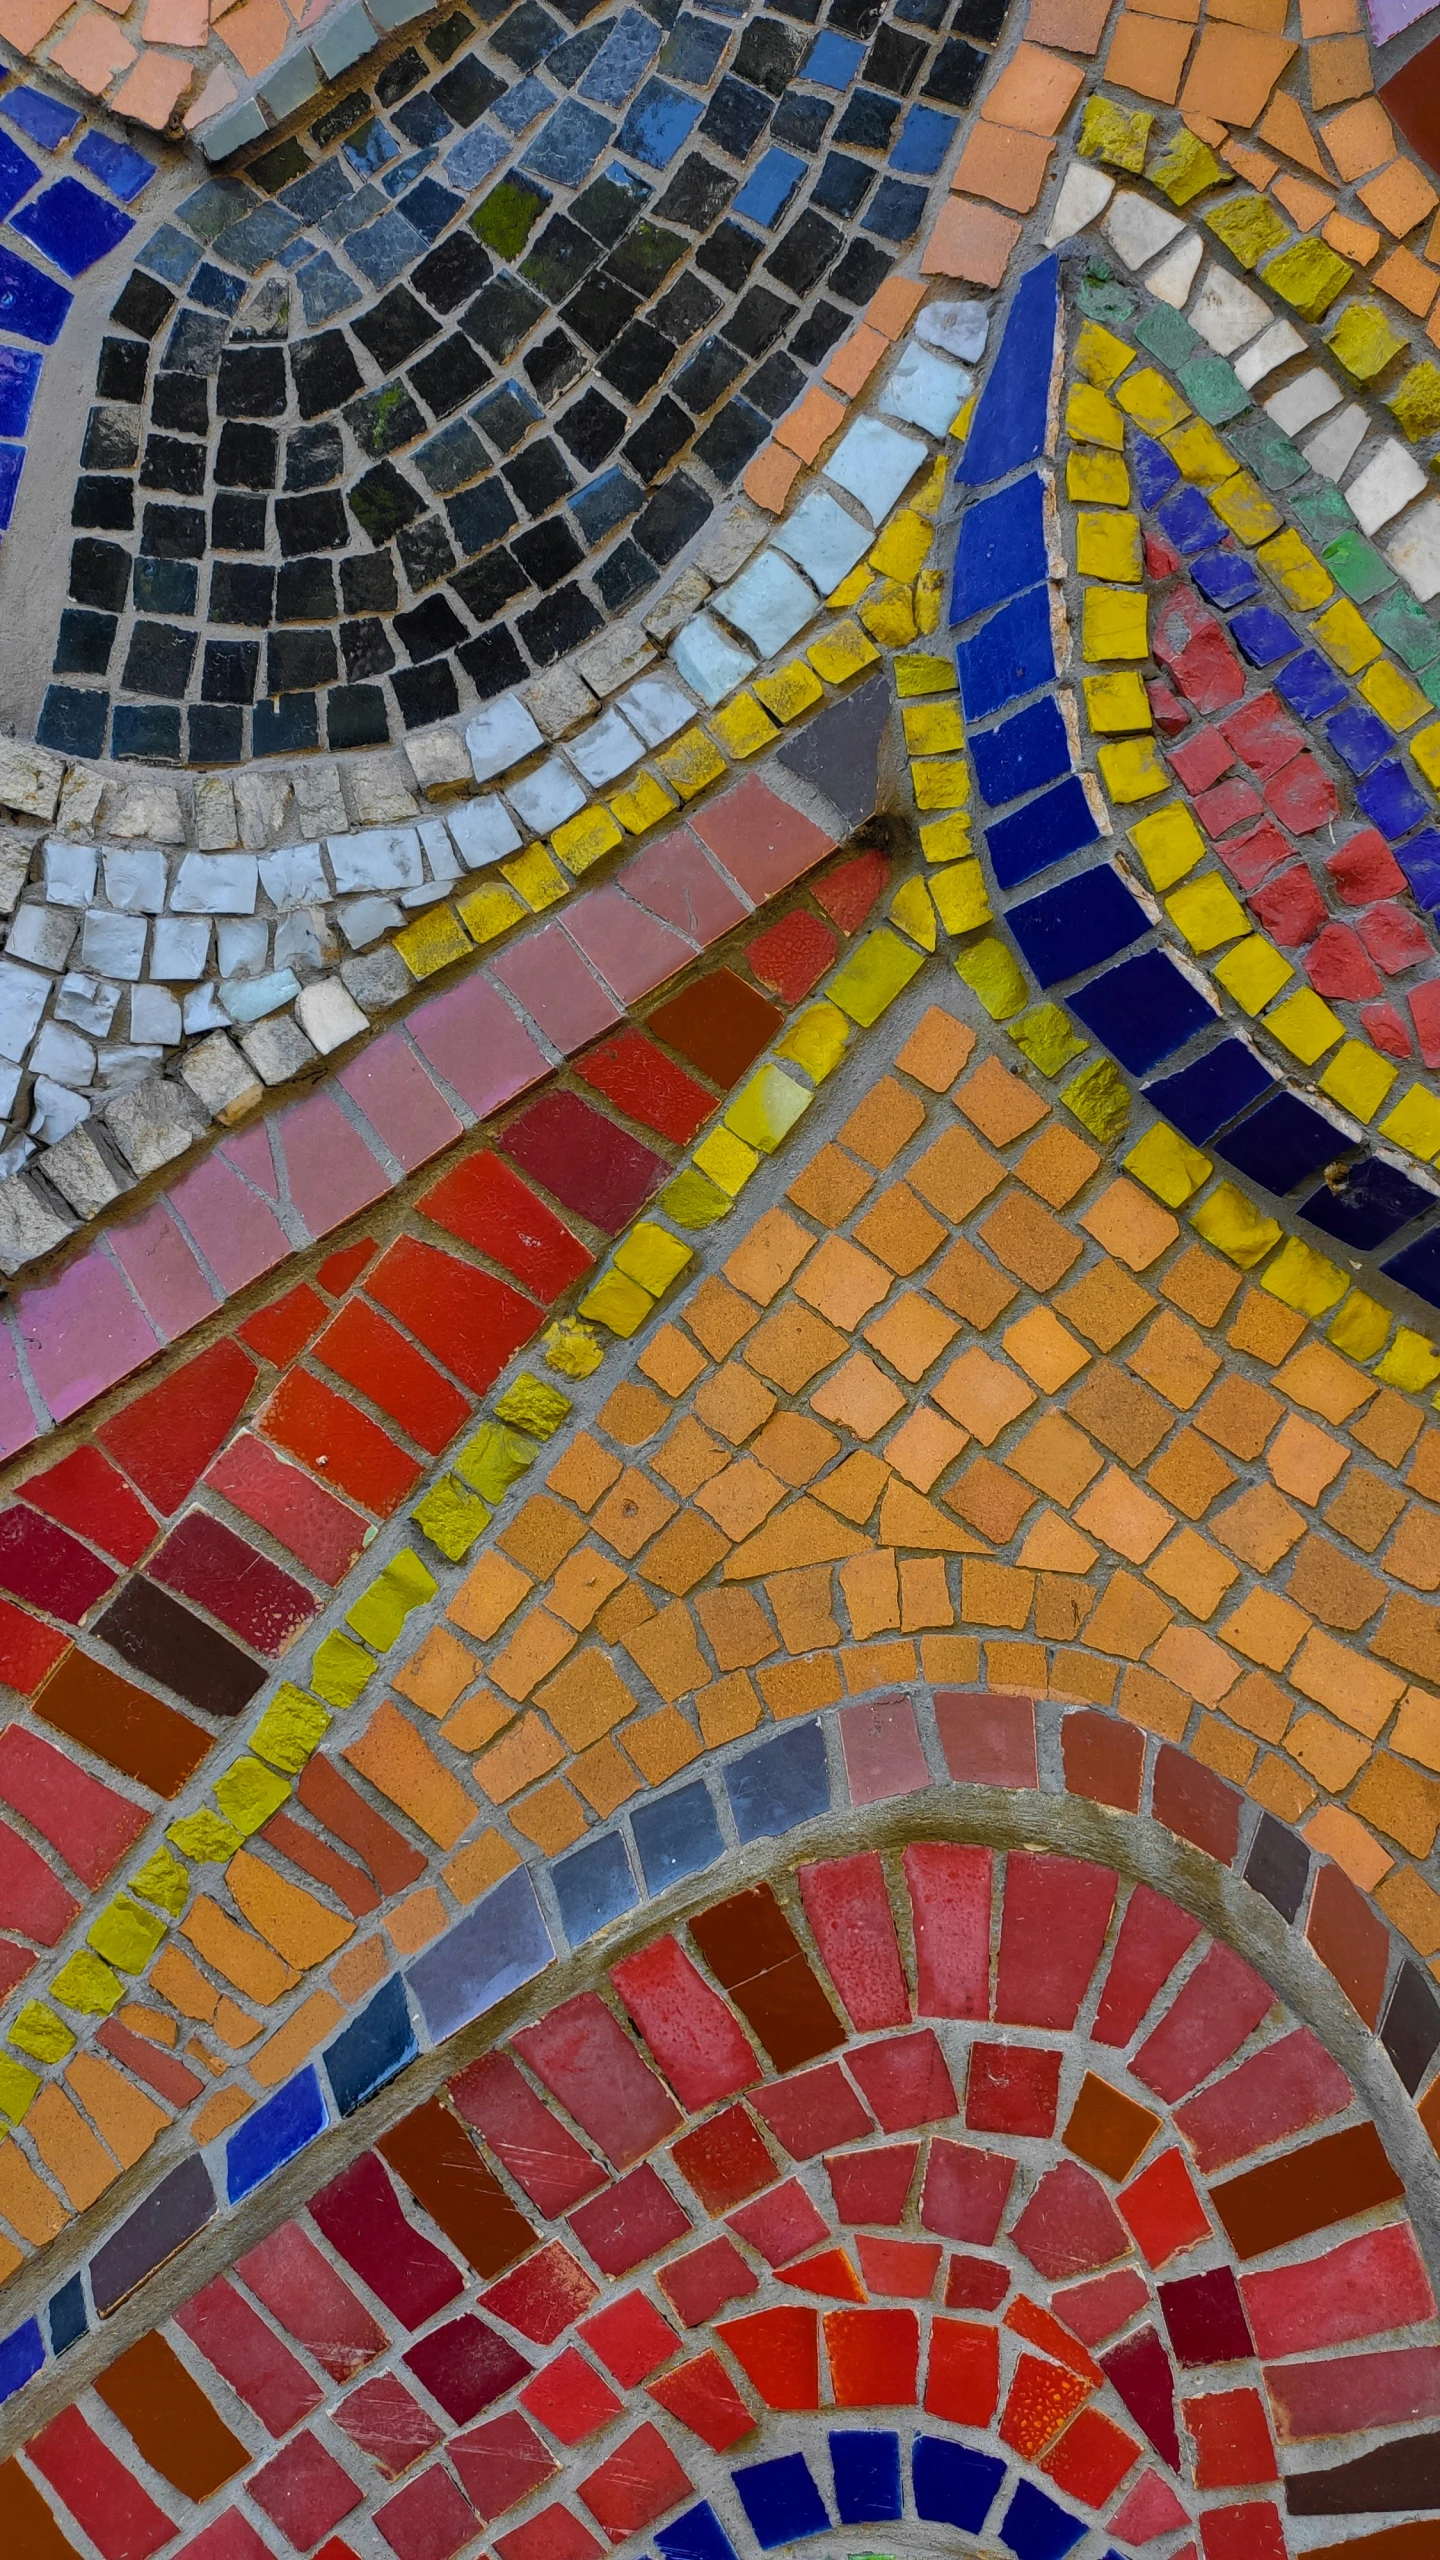 several color tiles are arranged together in a mosaic style